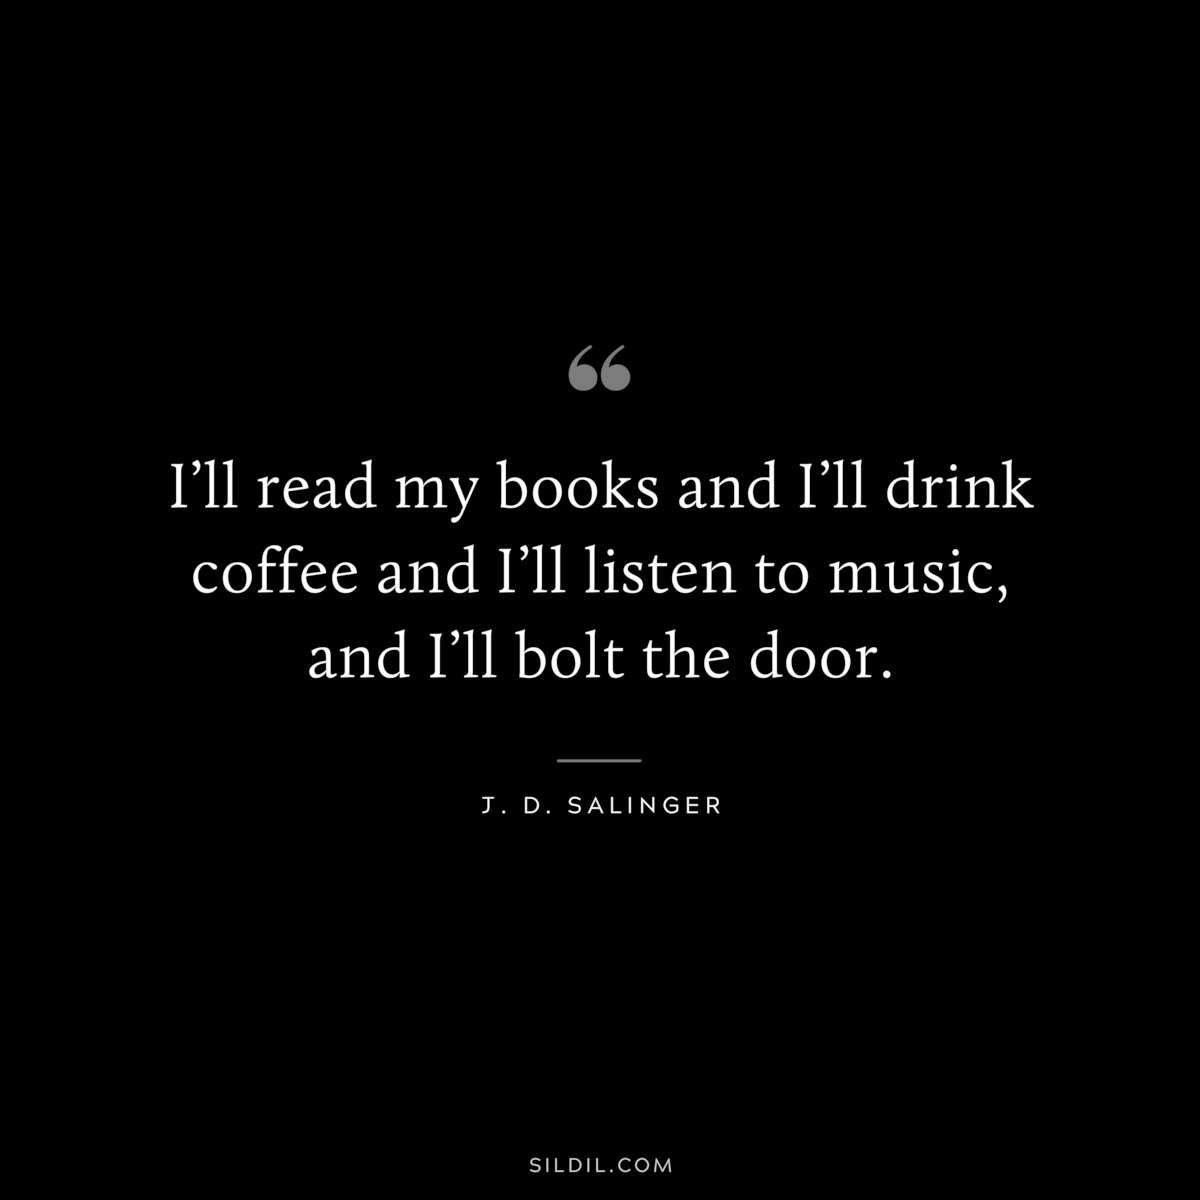 I’ll read my books and I’ll drink coffee and I’ll listen to music, and I’ll bolt the door. — J. D. Salinger